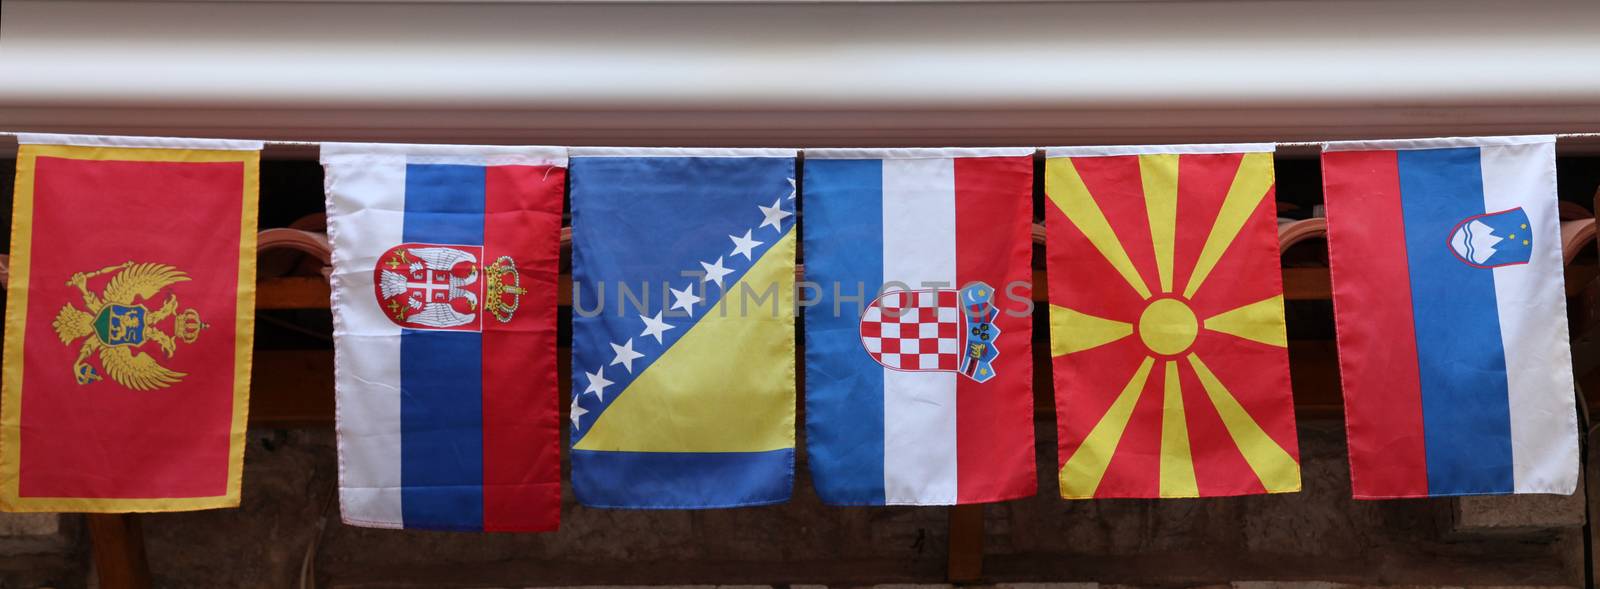 Flags of countries of the former Yugoslavia